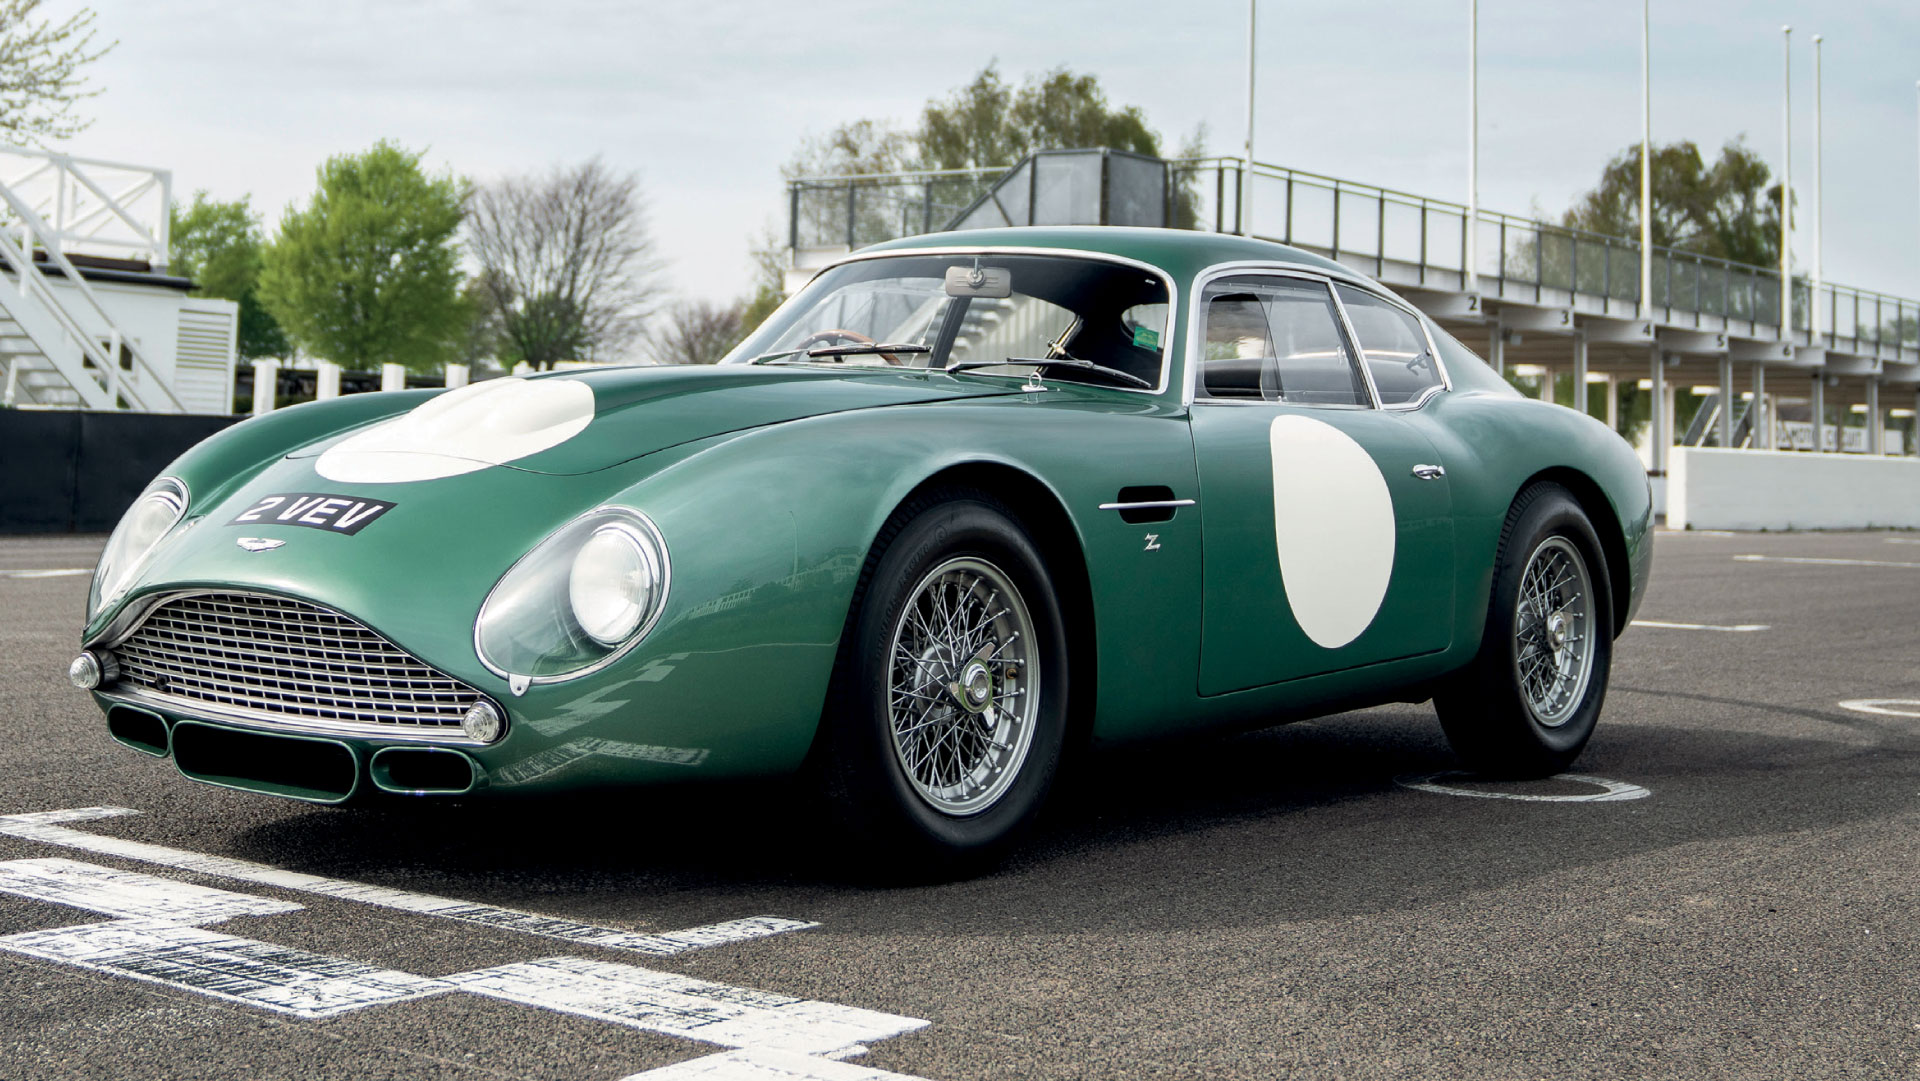 Knight Frank Luxury Investment Index looks at Classic Cars